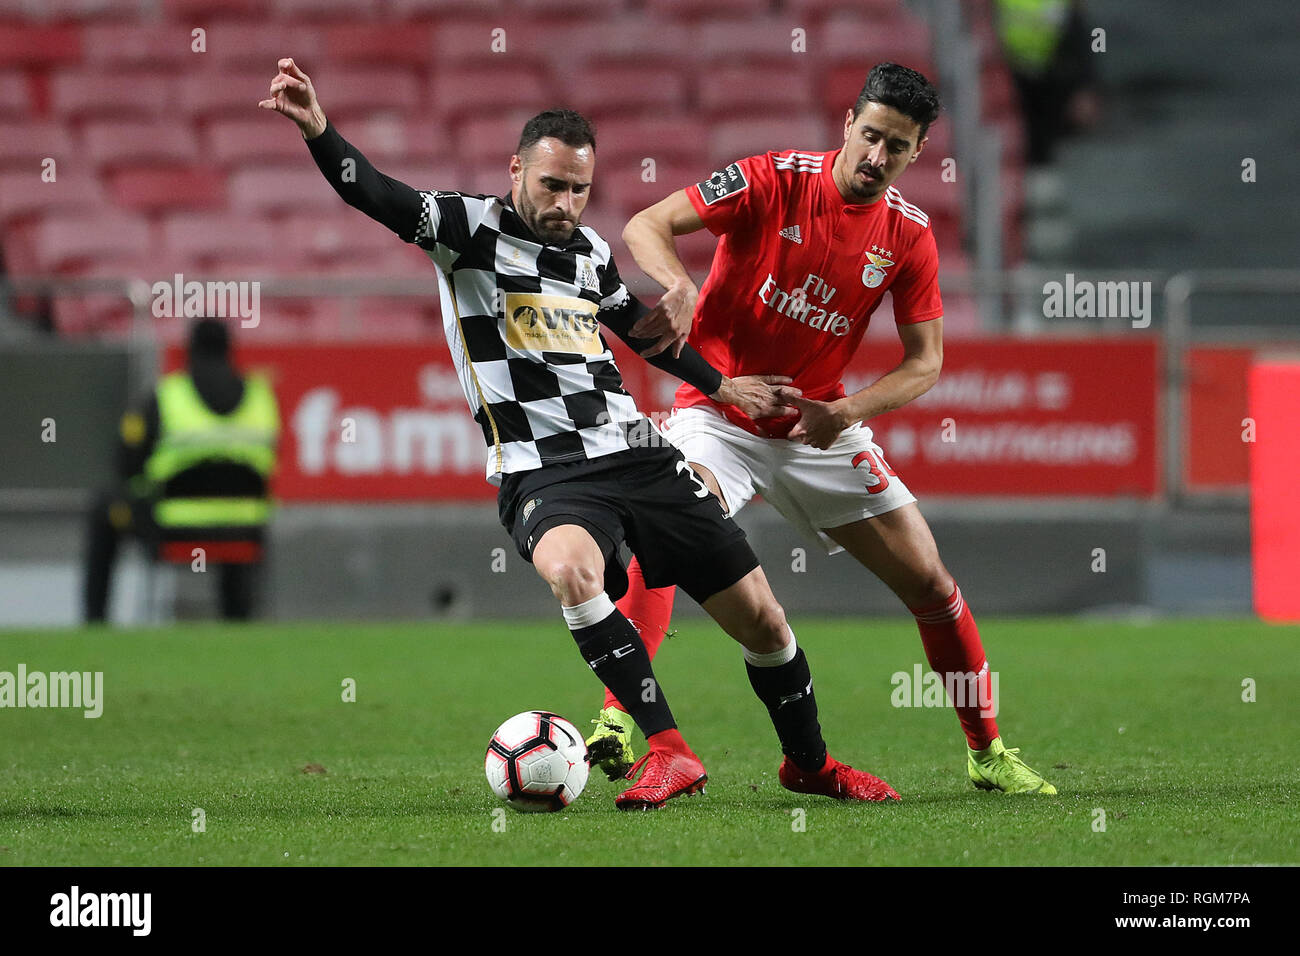 Rafa of Boavista FC (L) and André Almeida of SL Benfica (R) are seen in action during the League NOS 2018/19 football match between SL Benfica vs Boavista FC. (Final score; SL Benfica 5:1 Boavista FC) Stock Photo